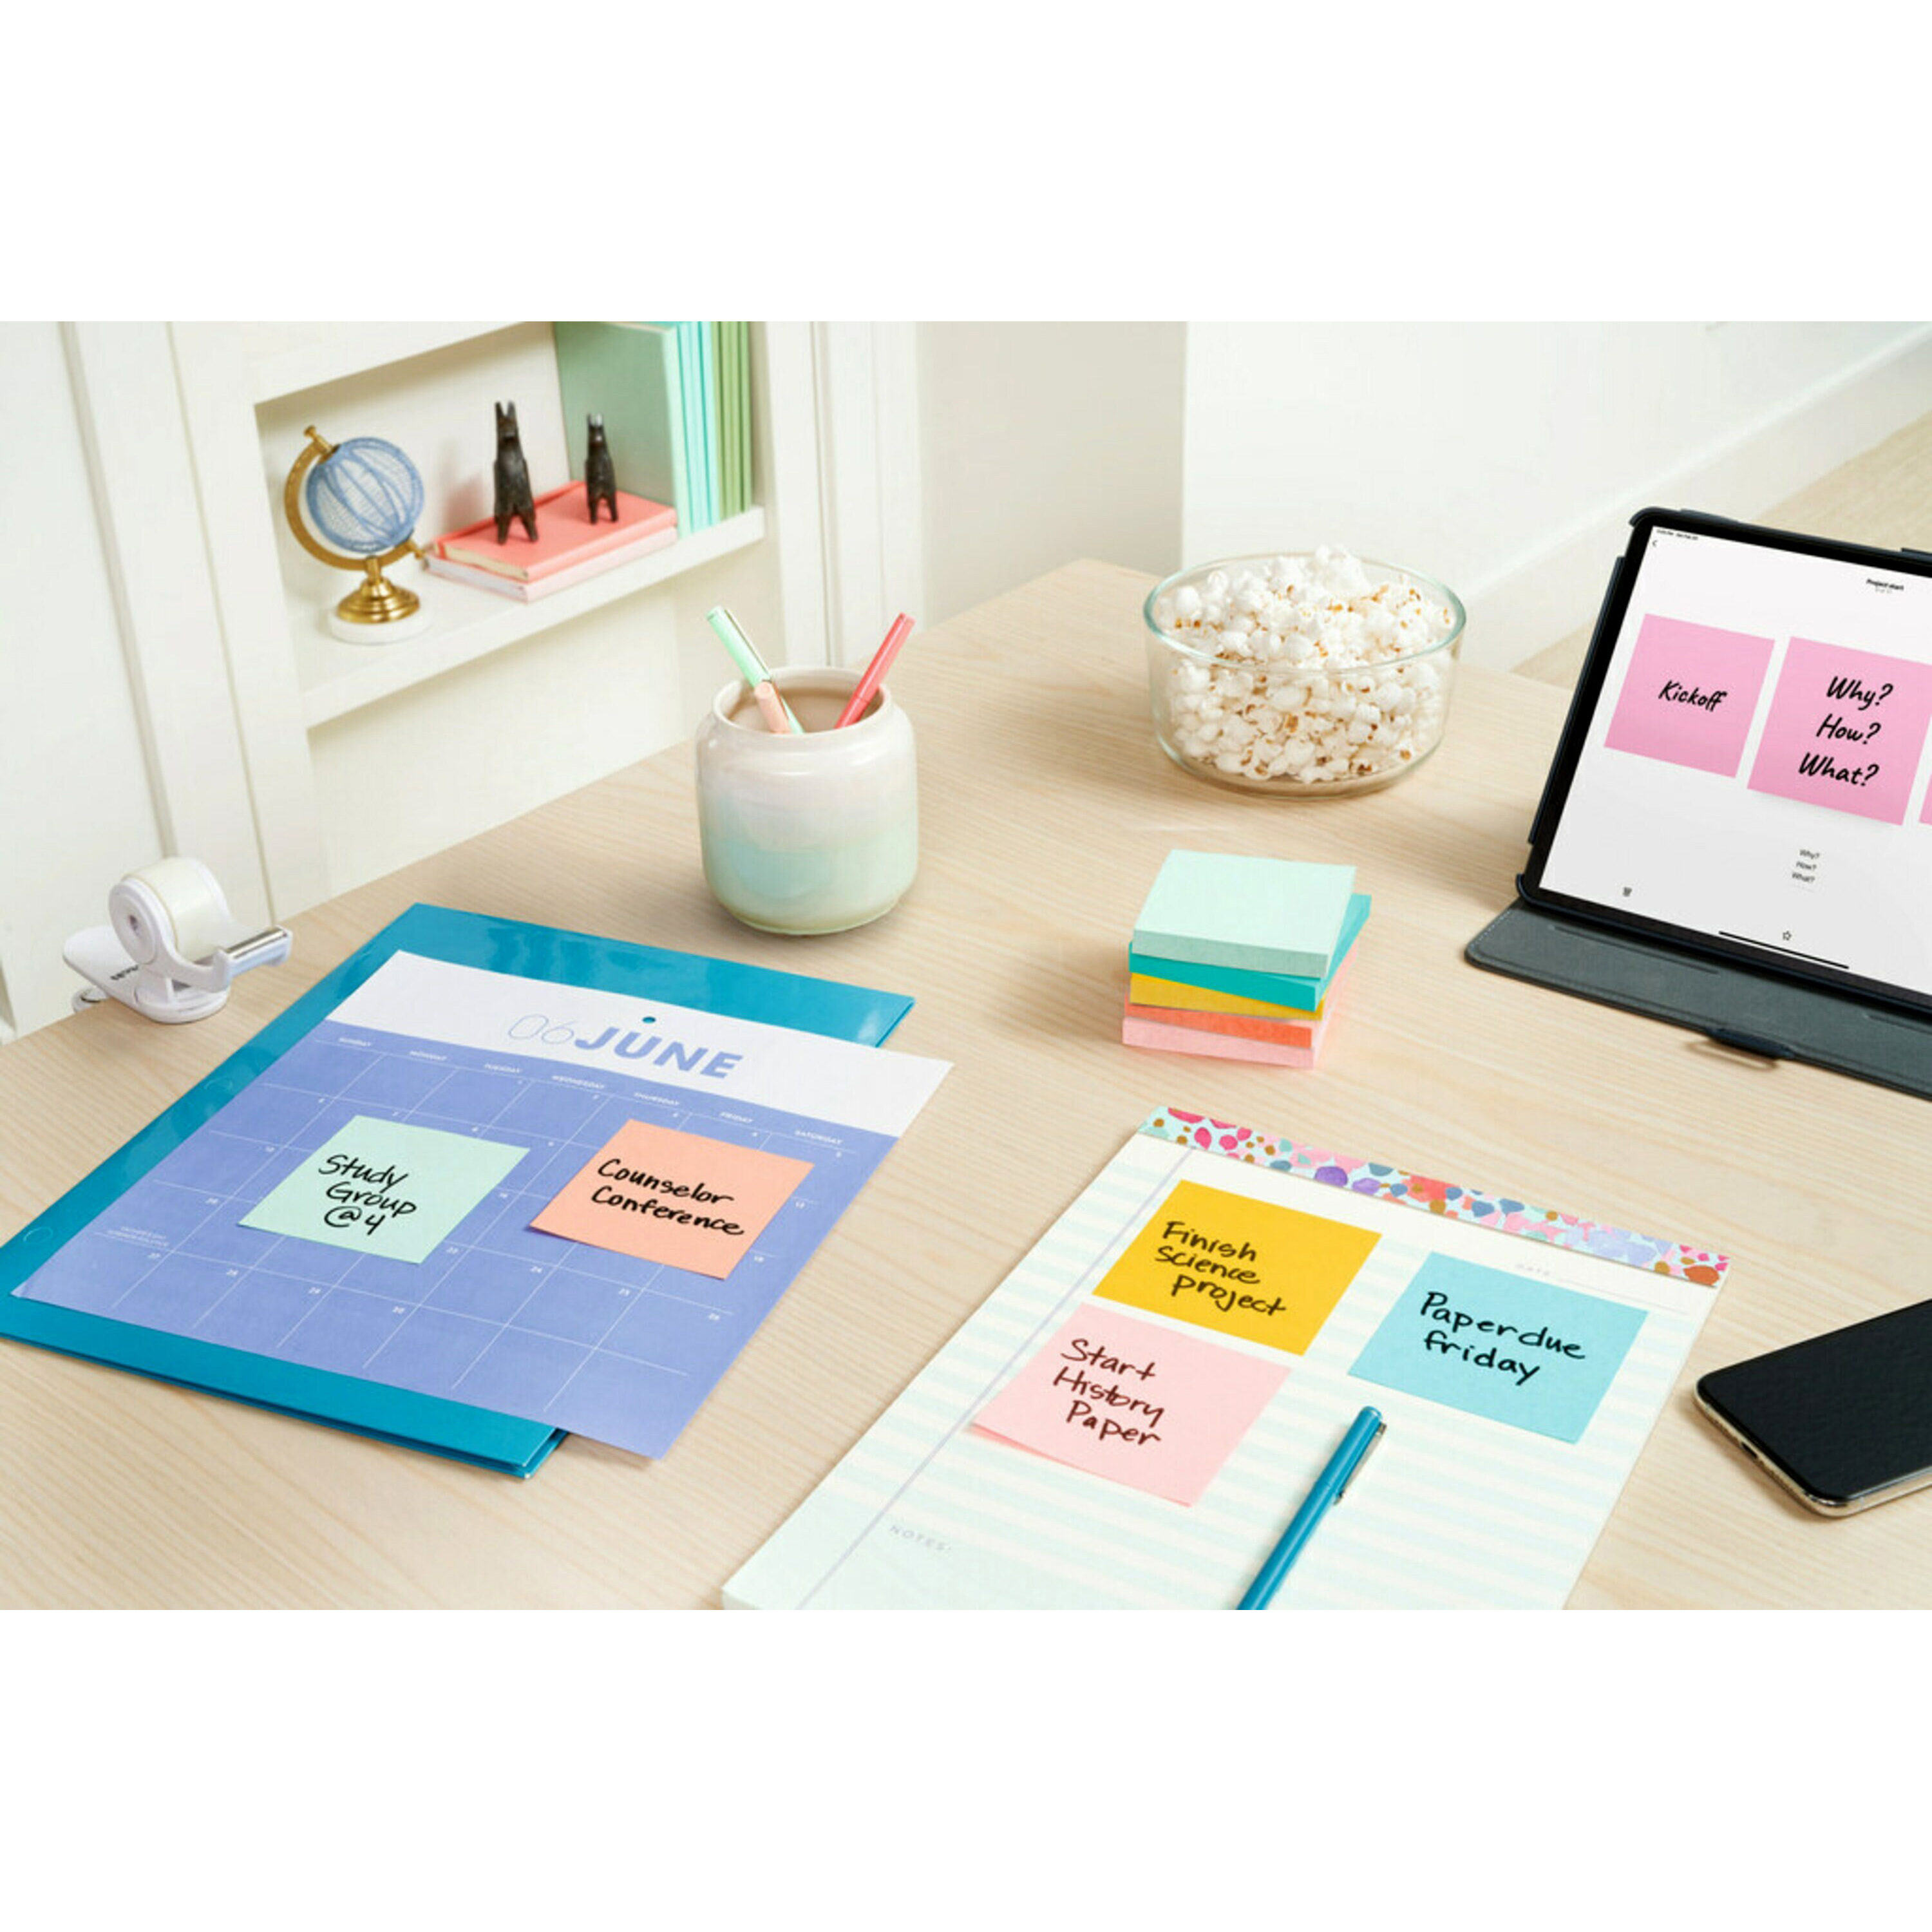 Better Office Products Lined Sticky Notes 3 x 3, 10 Pack, 1,000 Sheets (100/Pad), Self Stick Notes with Lines, Assorted Pastel Colors, by Better Off